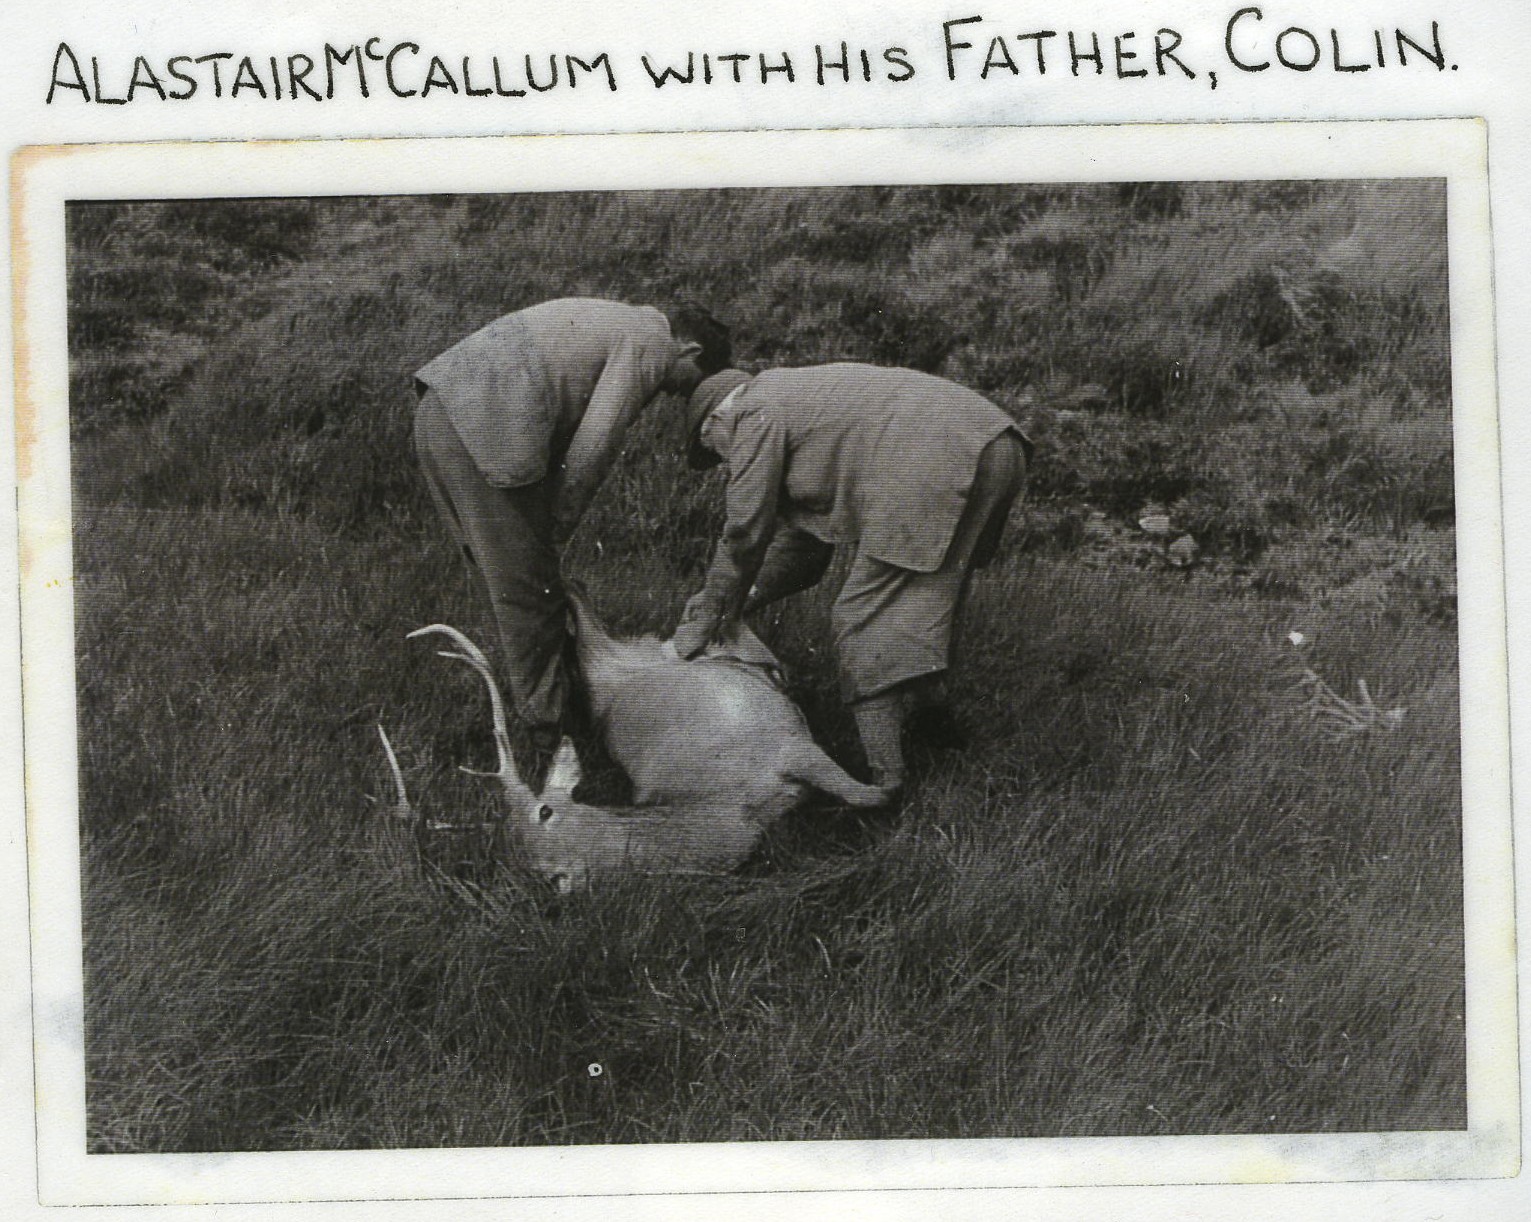 Alistair MacCallum with his father, Colin